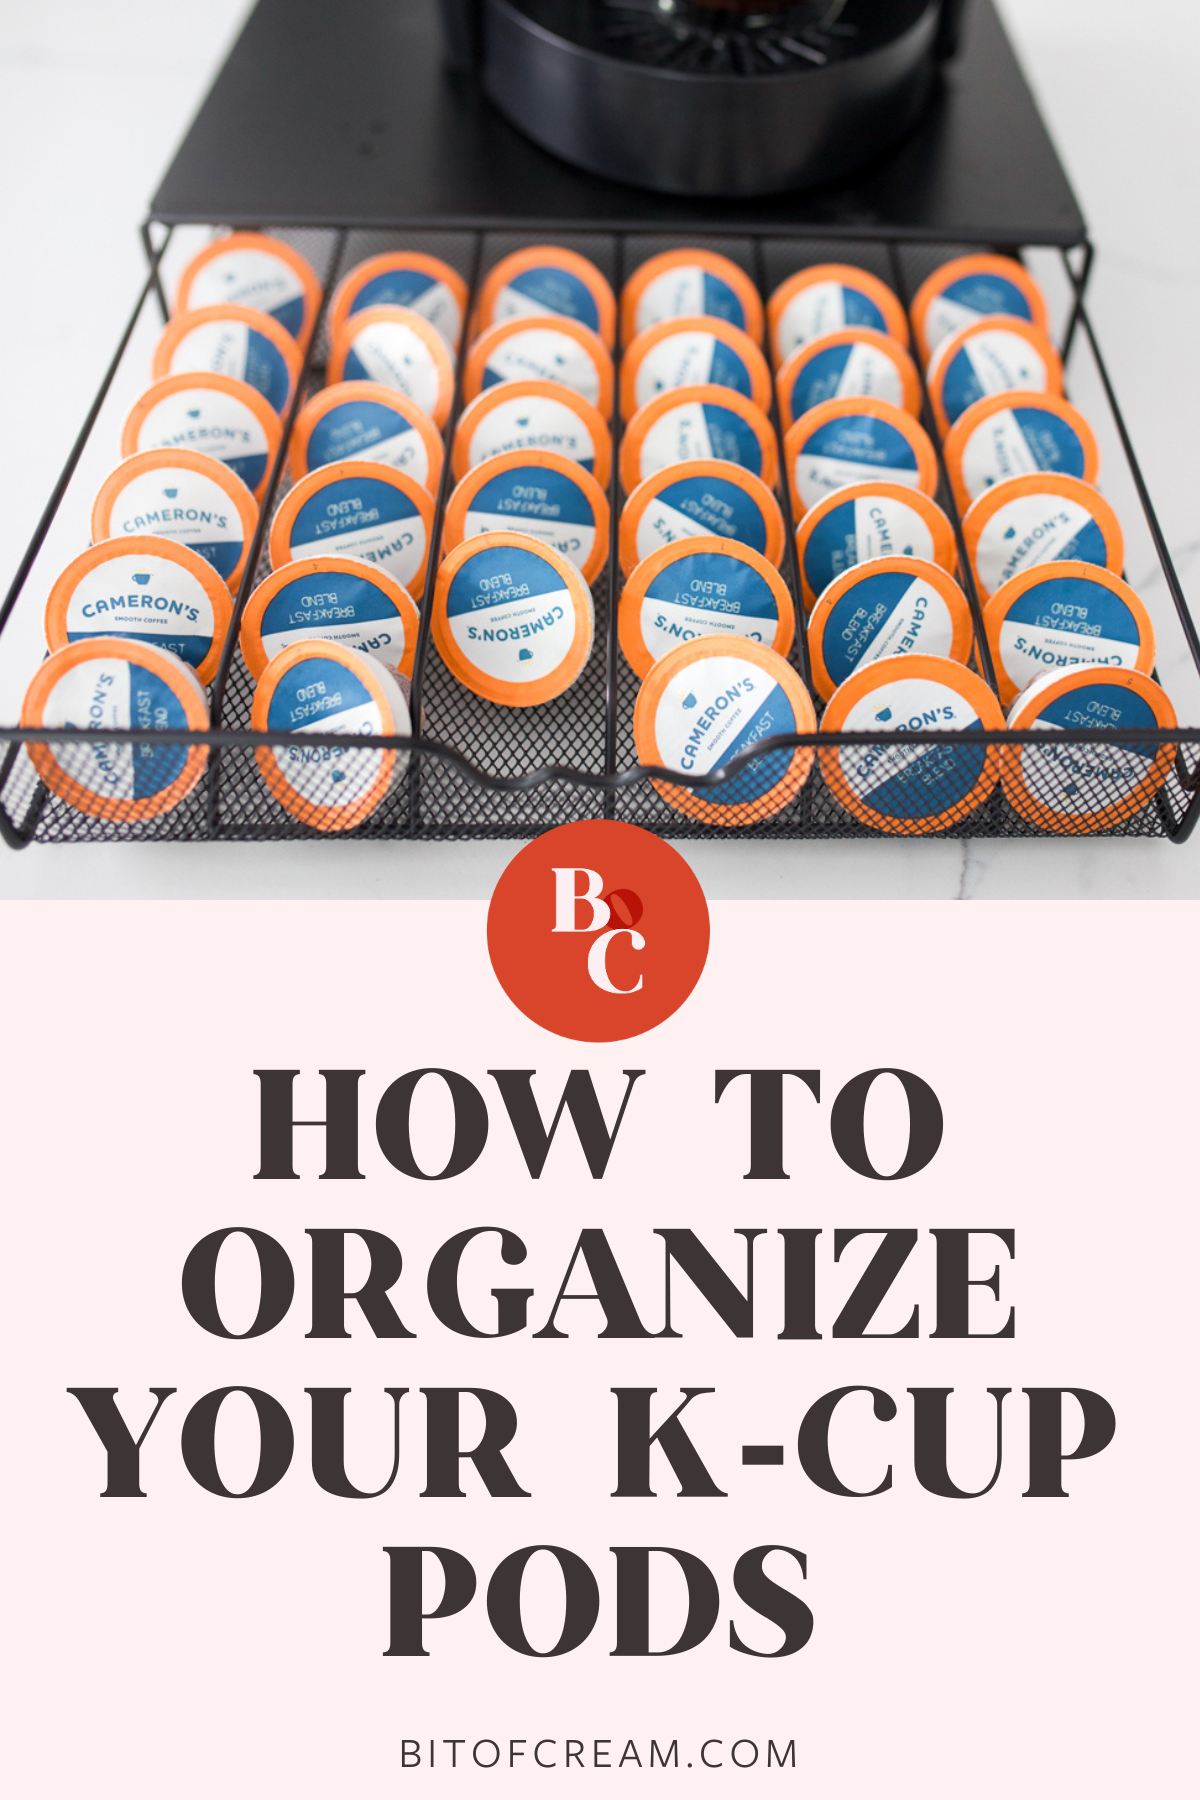 HOW To organize k-cup pods